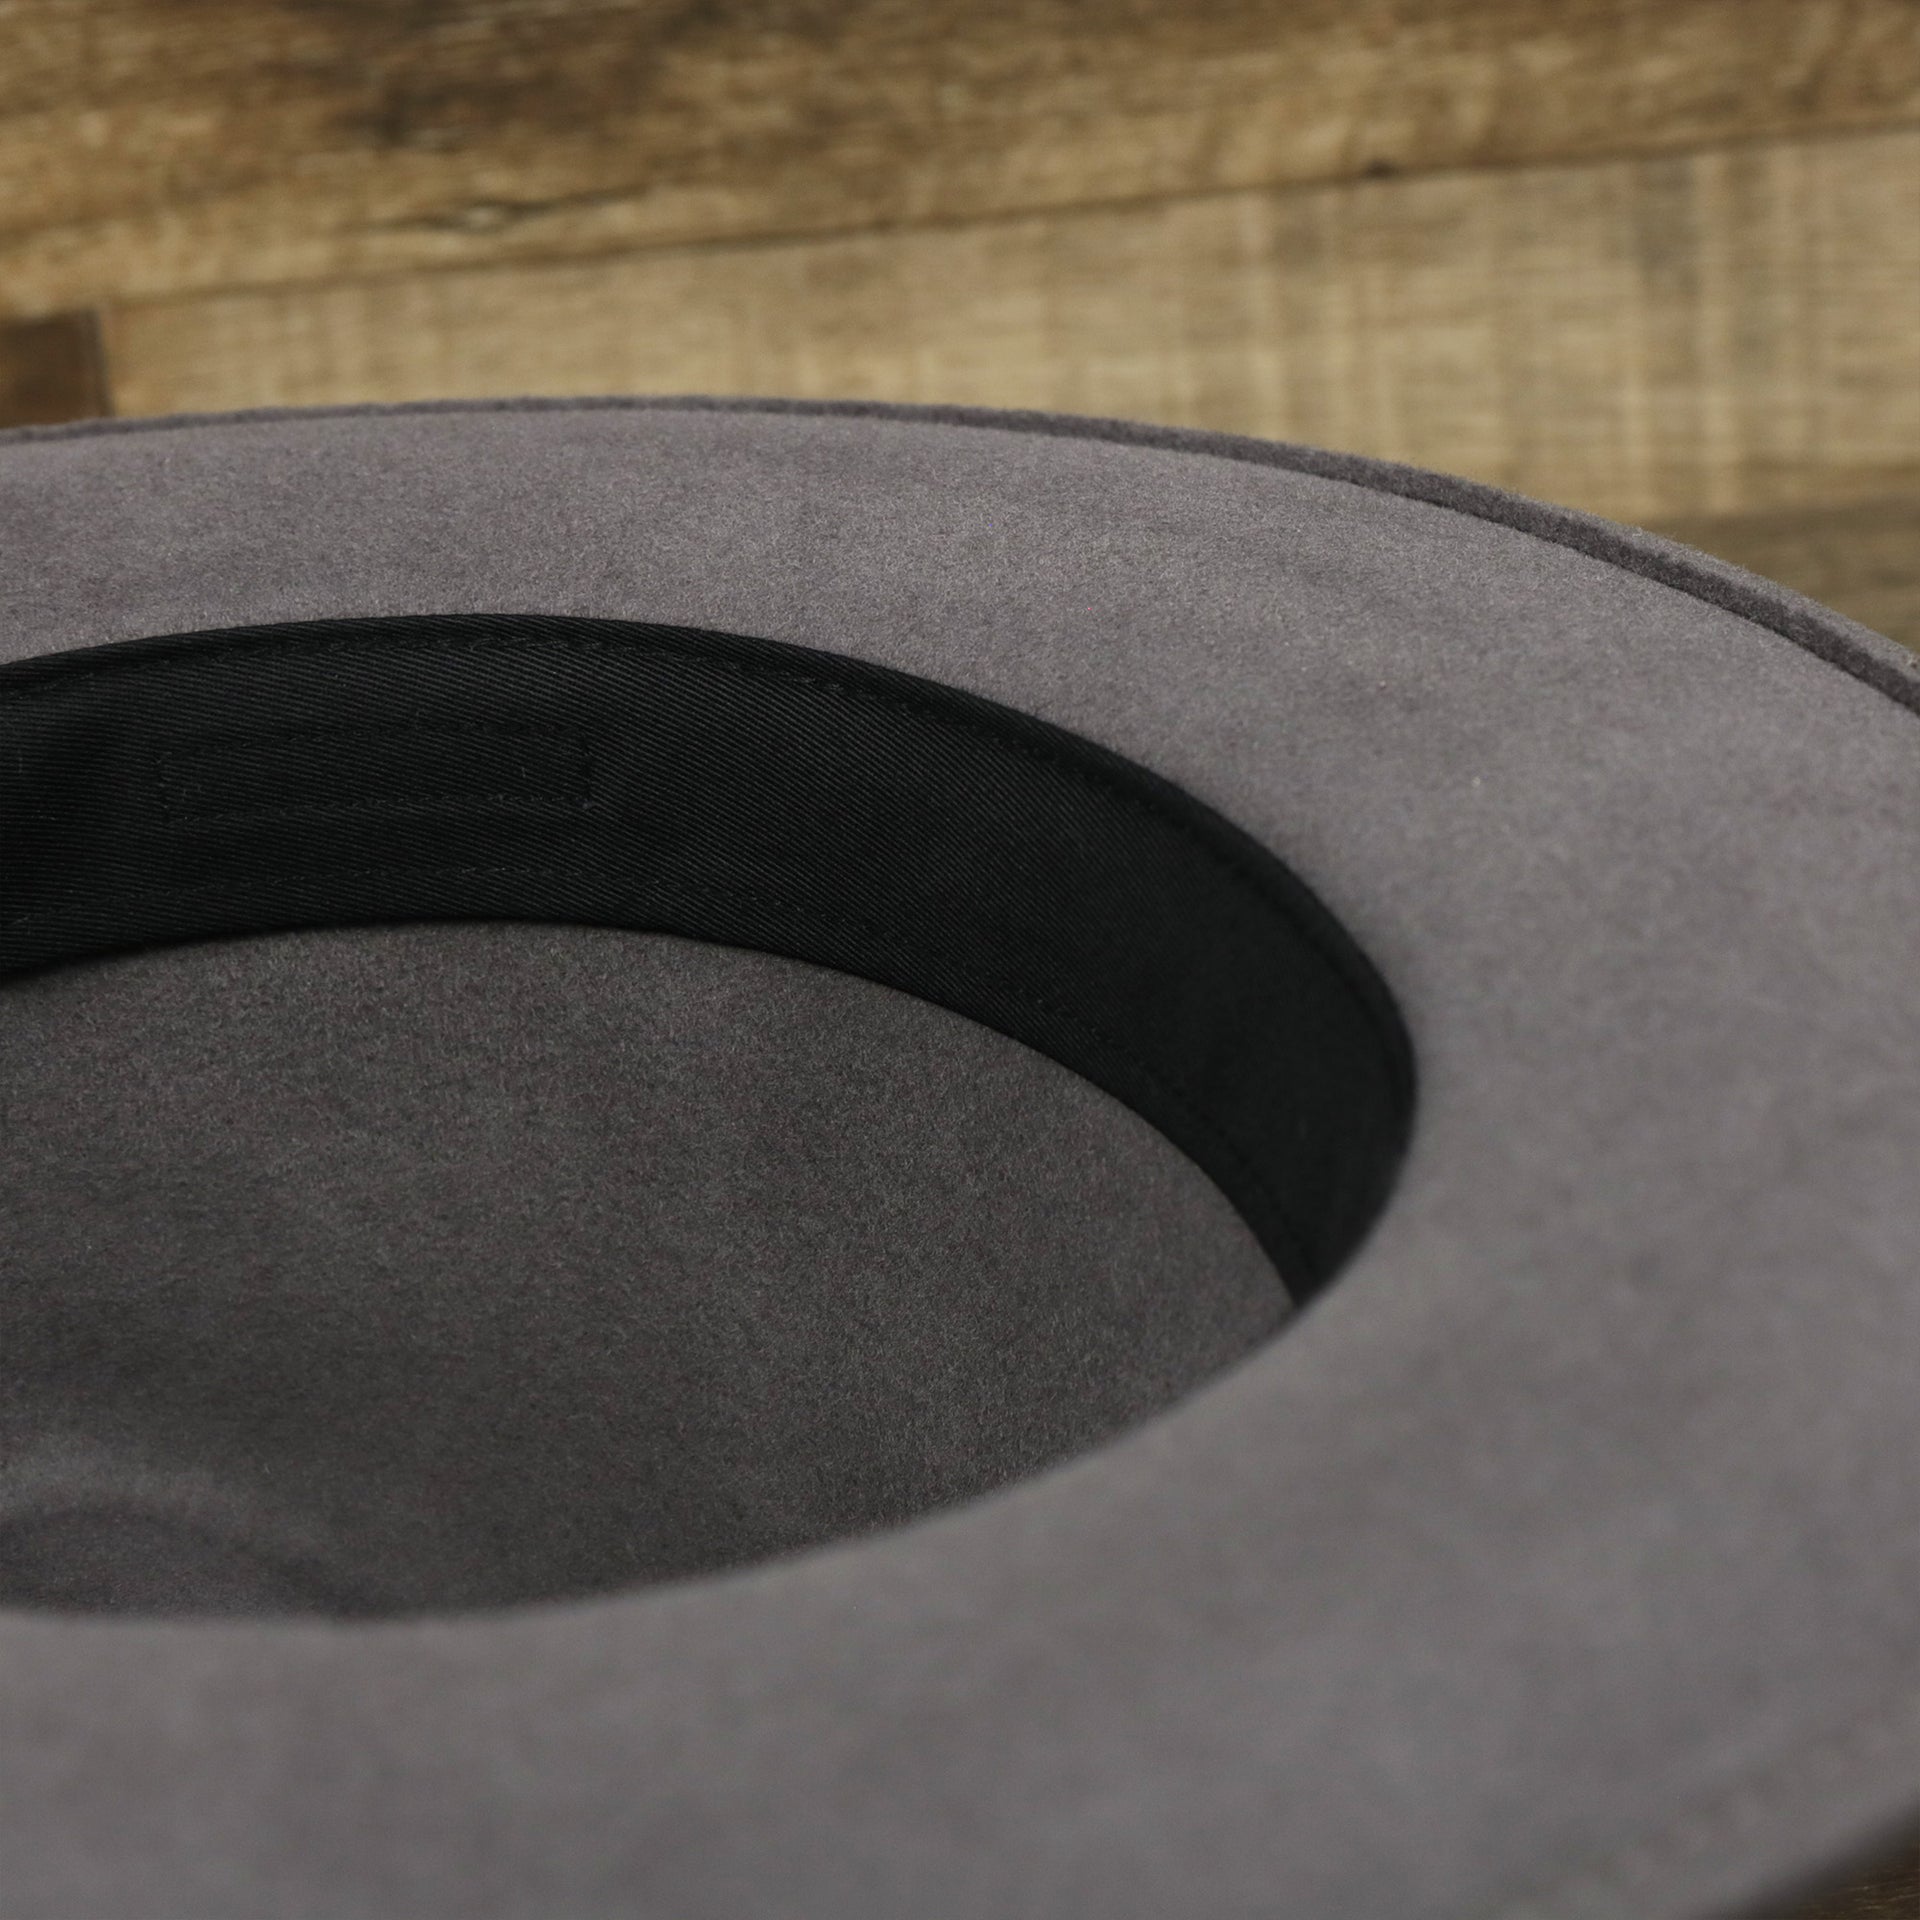 A close up of the underside of the Wide Brim Ribbon Edge Chared Fedora Hat with Brown Paisley Silk Interior | Zertrue 100% Australian Wool